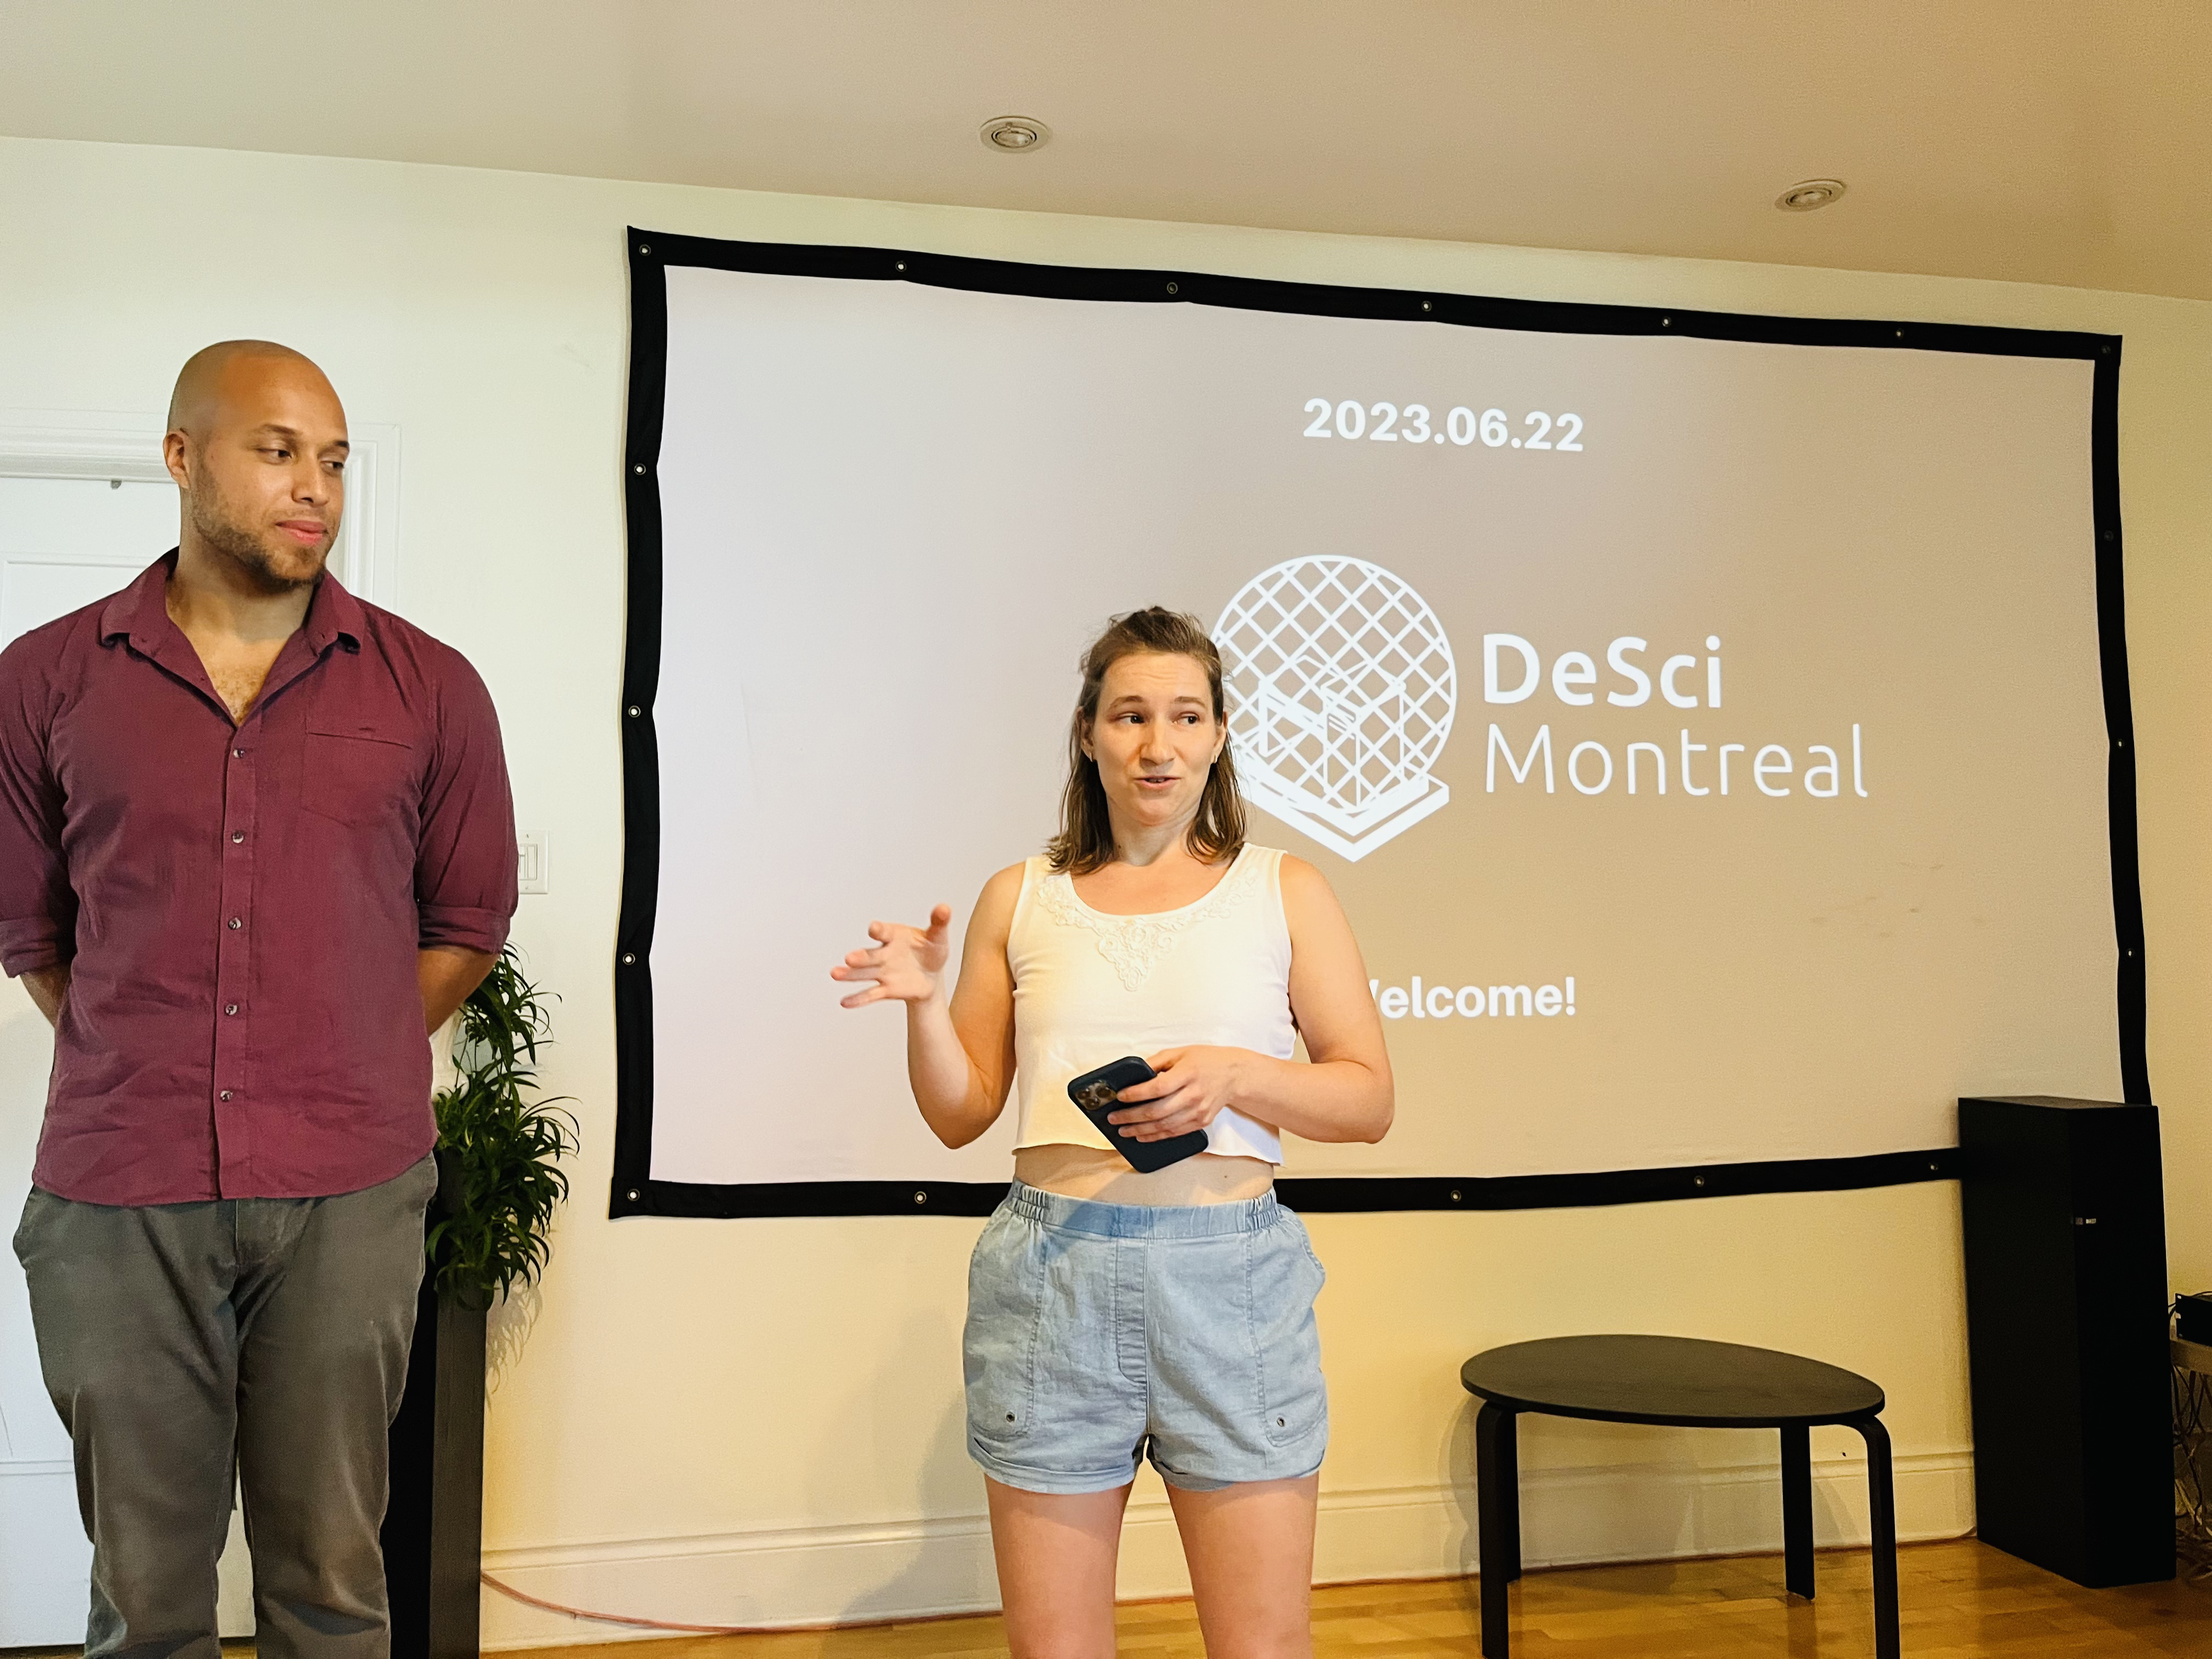 DeSci Montreal: Supporting Creative Science and Intellectual Property in the Technological Revolution